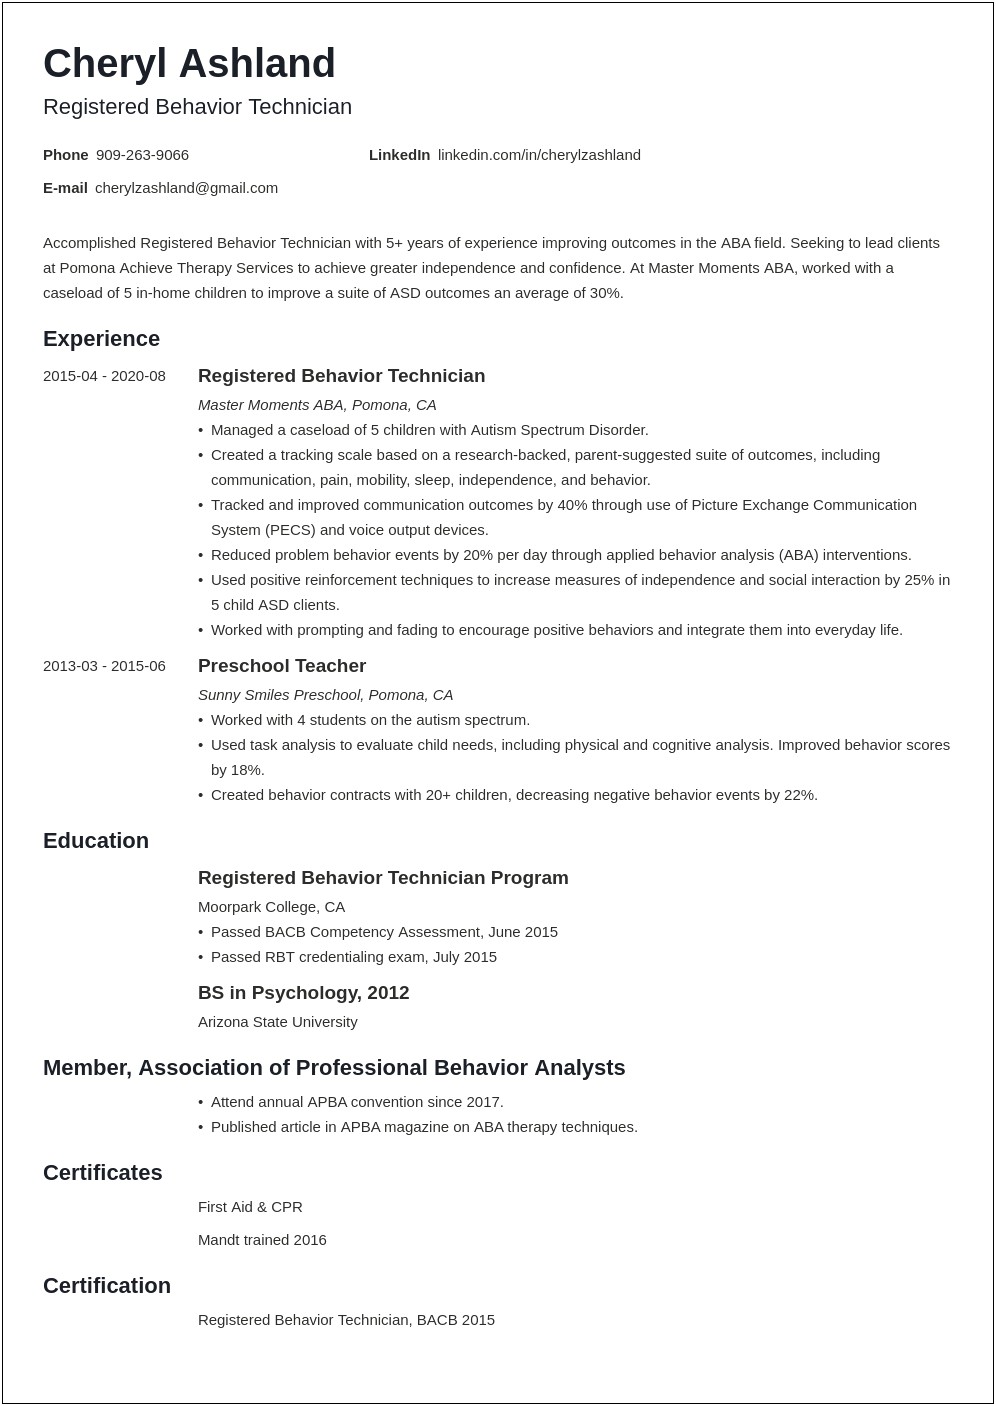 Physical Therapy Assistant Resume School Based With Austism